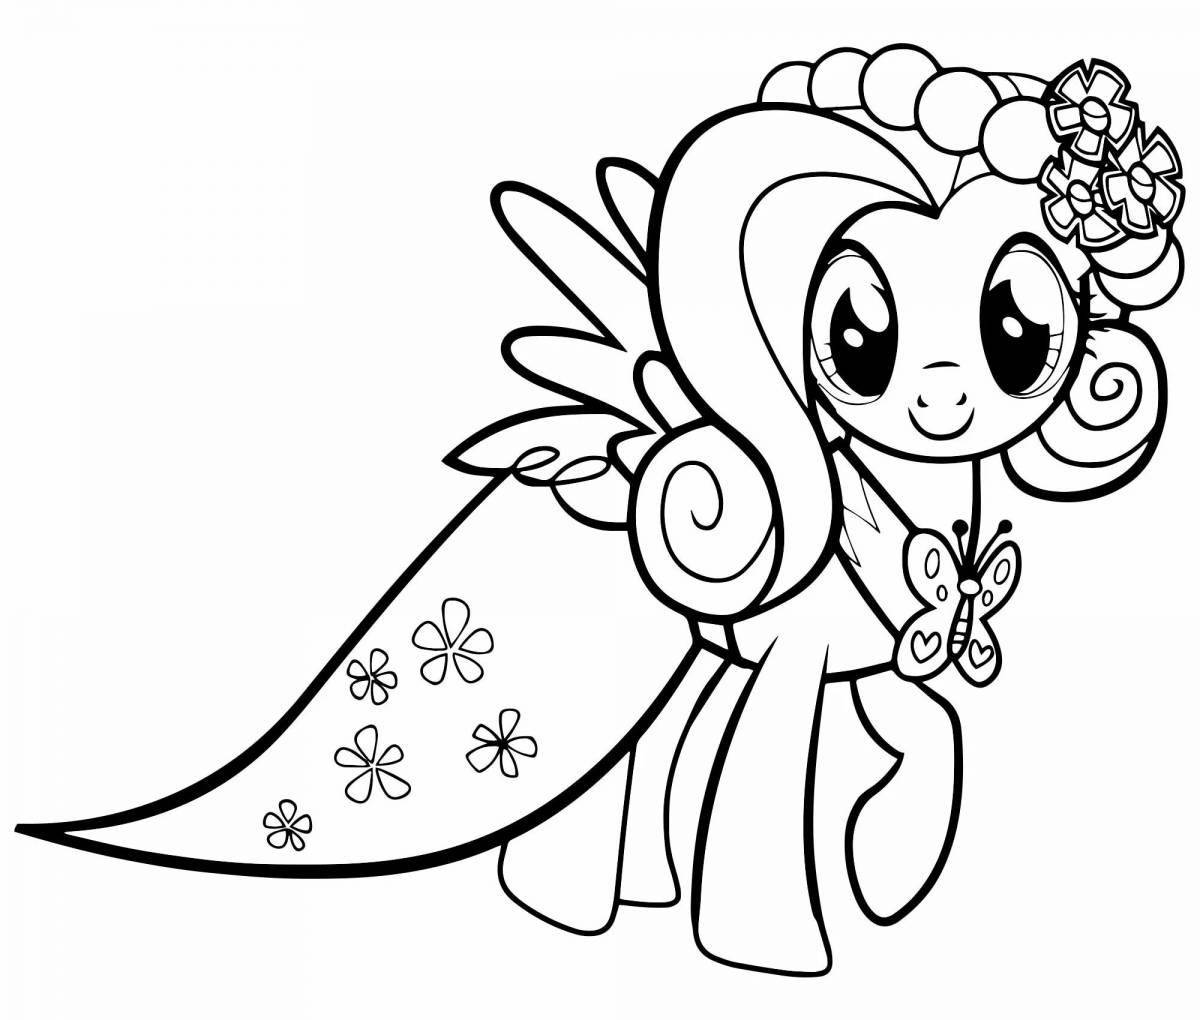 Cute pony coloring book for 4-5 year olds